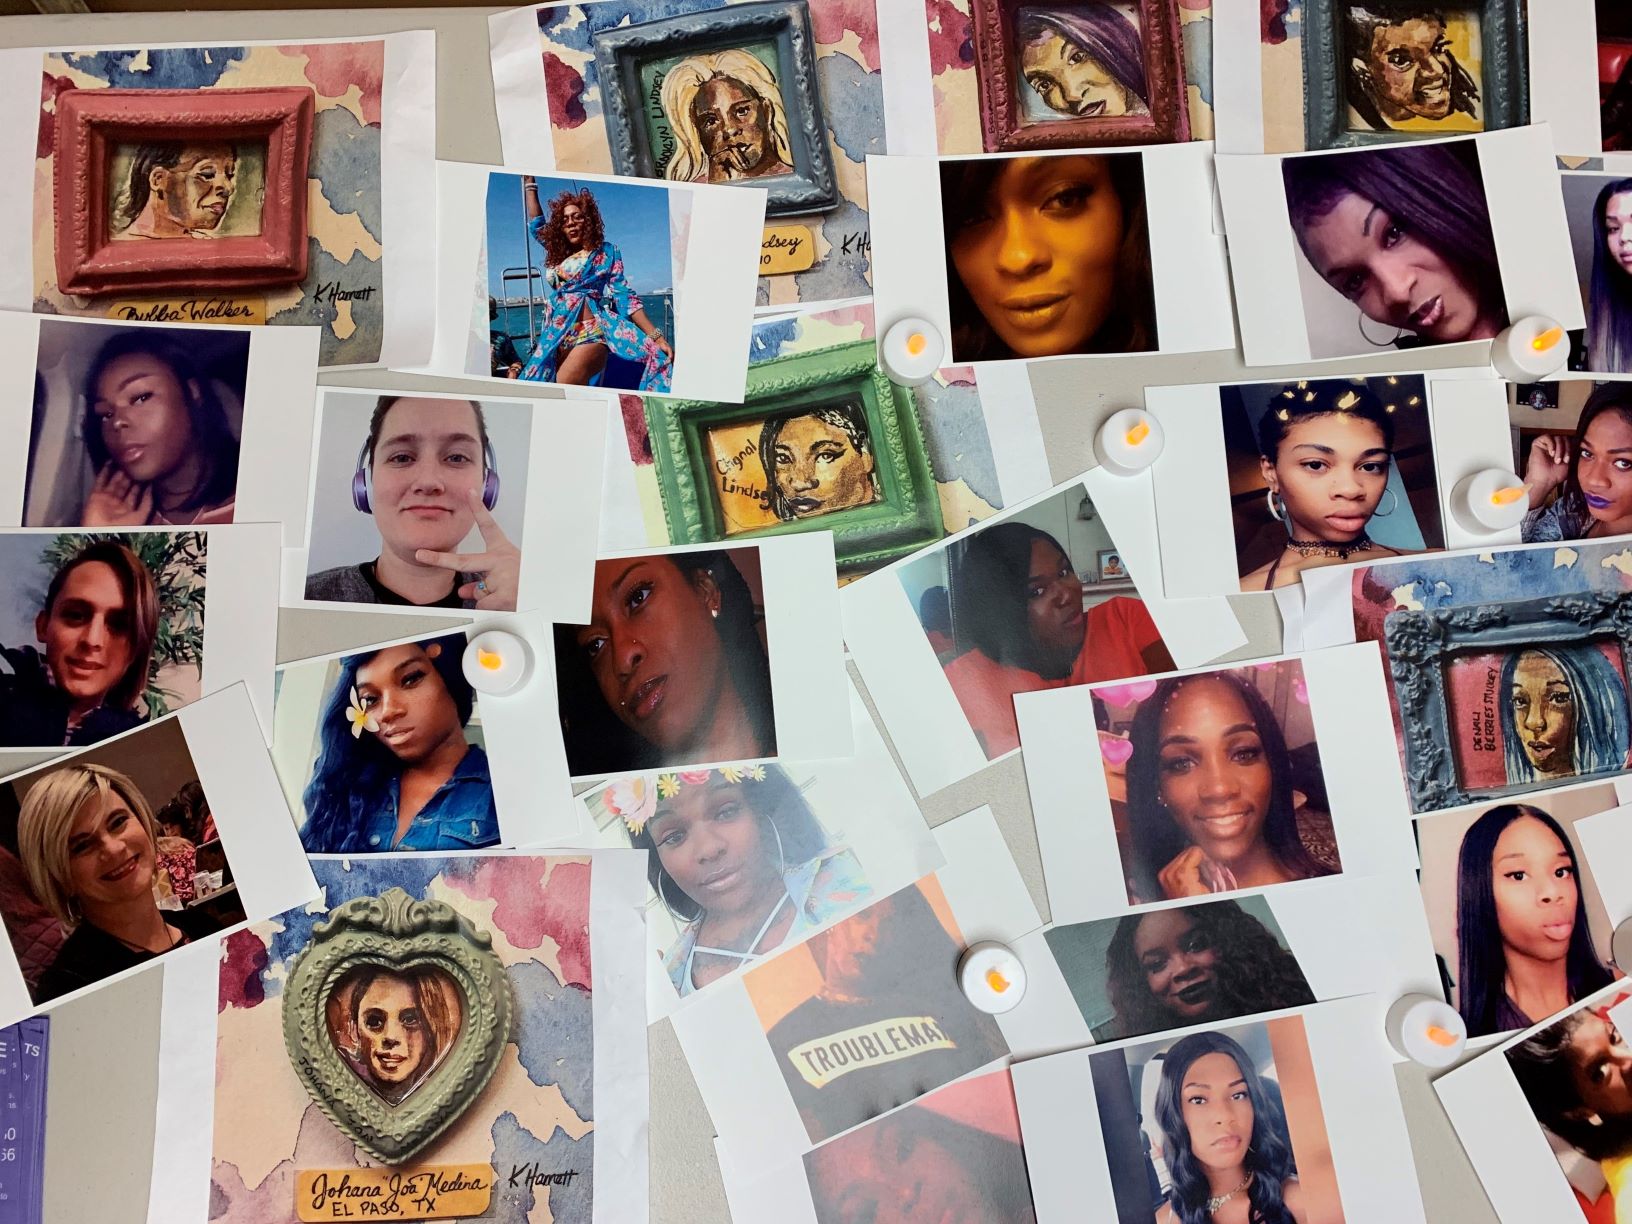 Pcitures of Transgender people murdered in the United States in the year 2018-2019 are pinned to an off-white wall